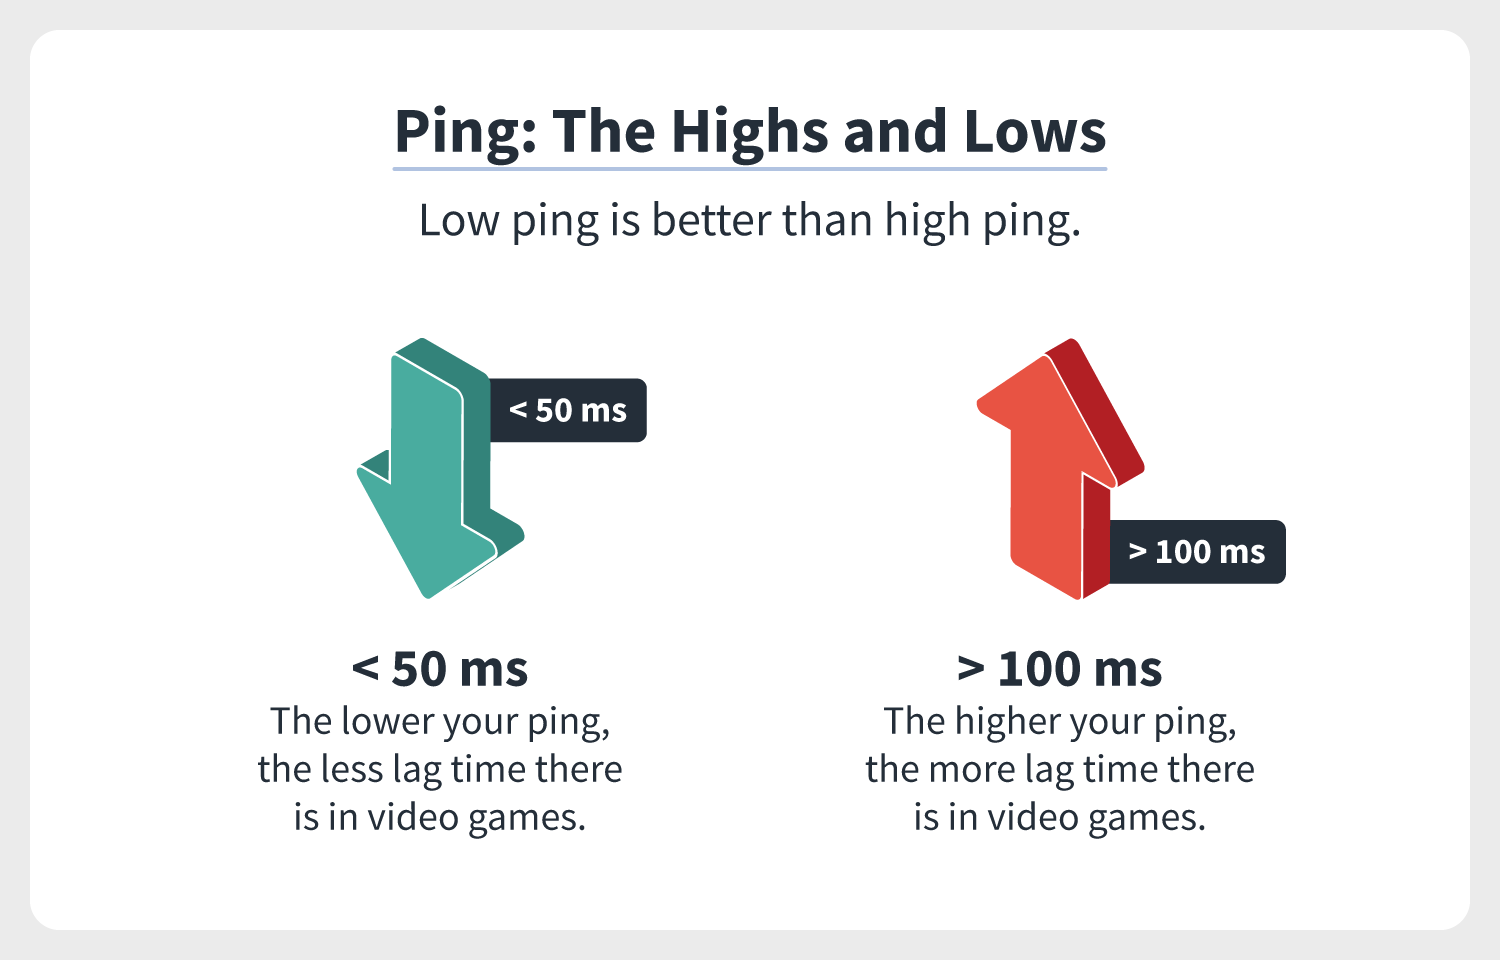 eyelash Institute micro How to lower ping and ultimately reduce lag in video games | Norton